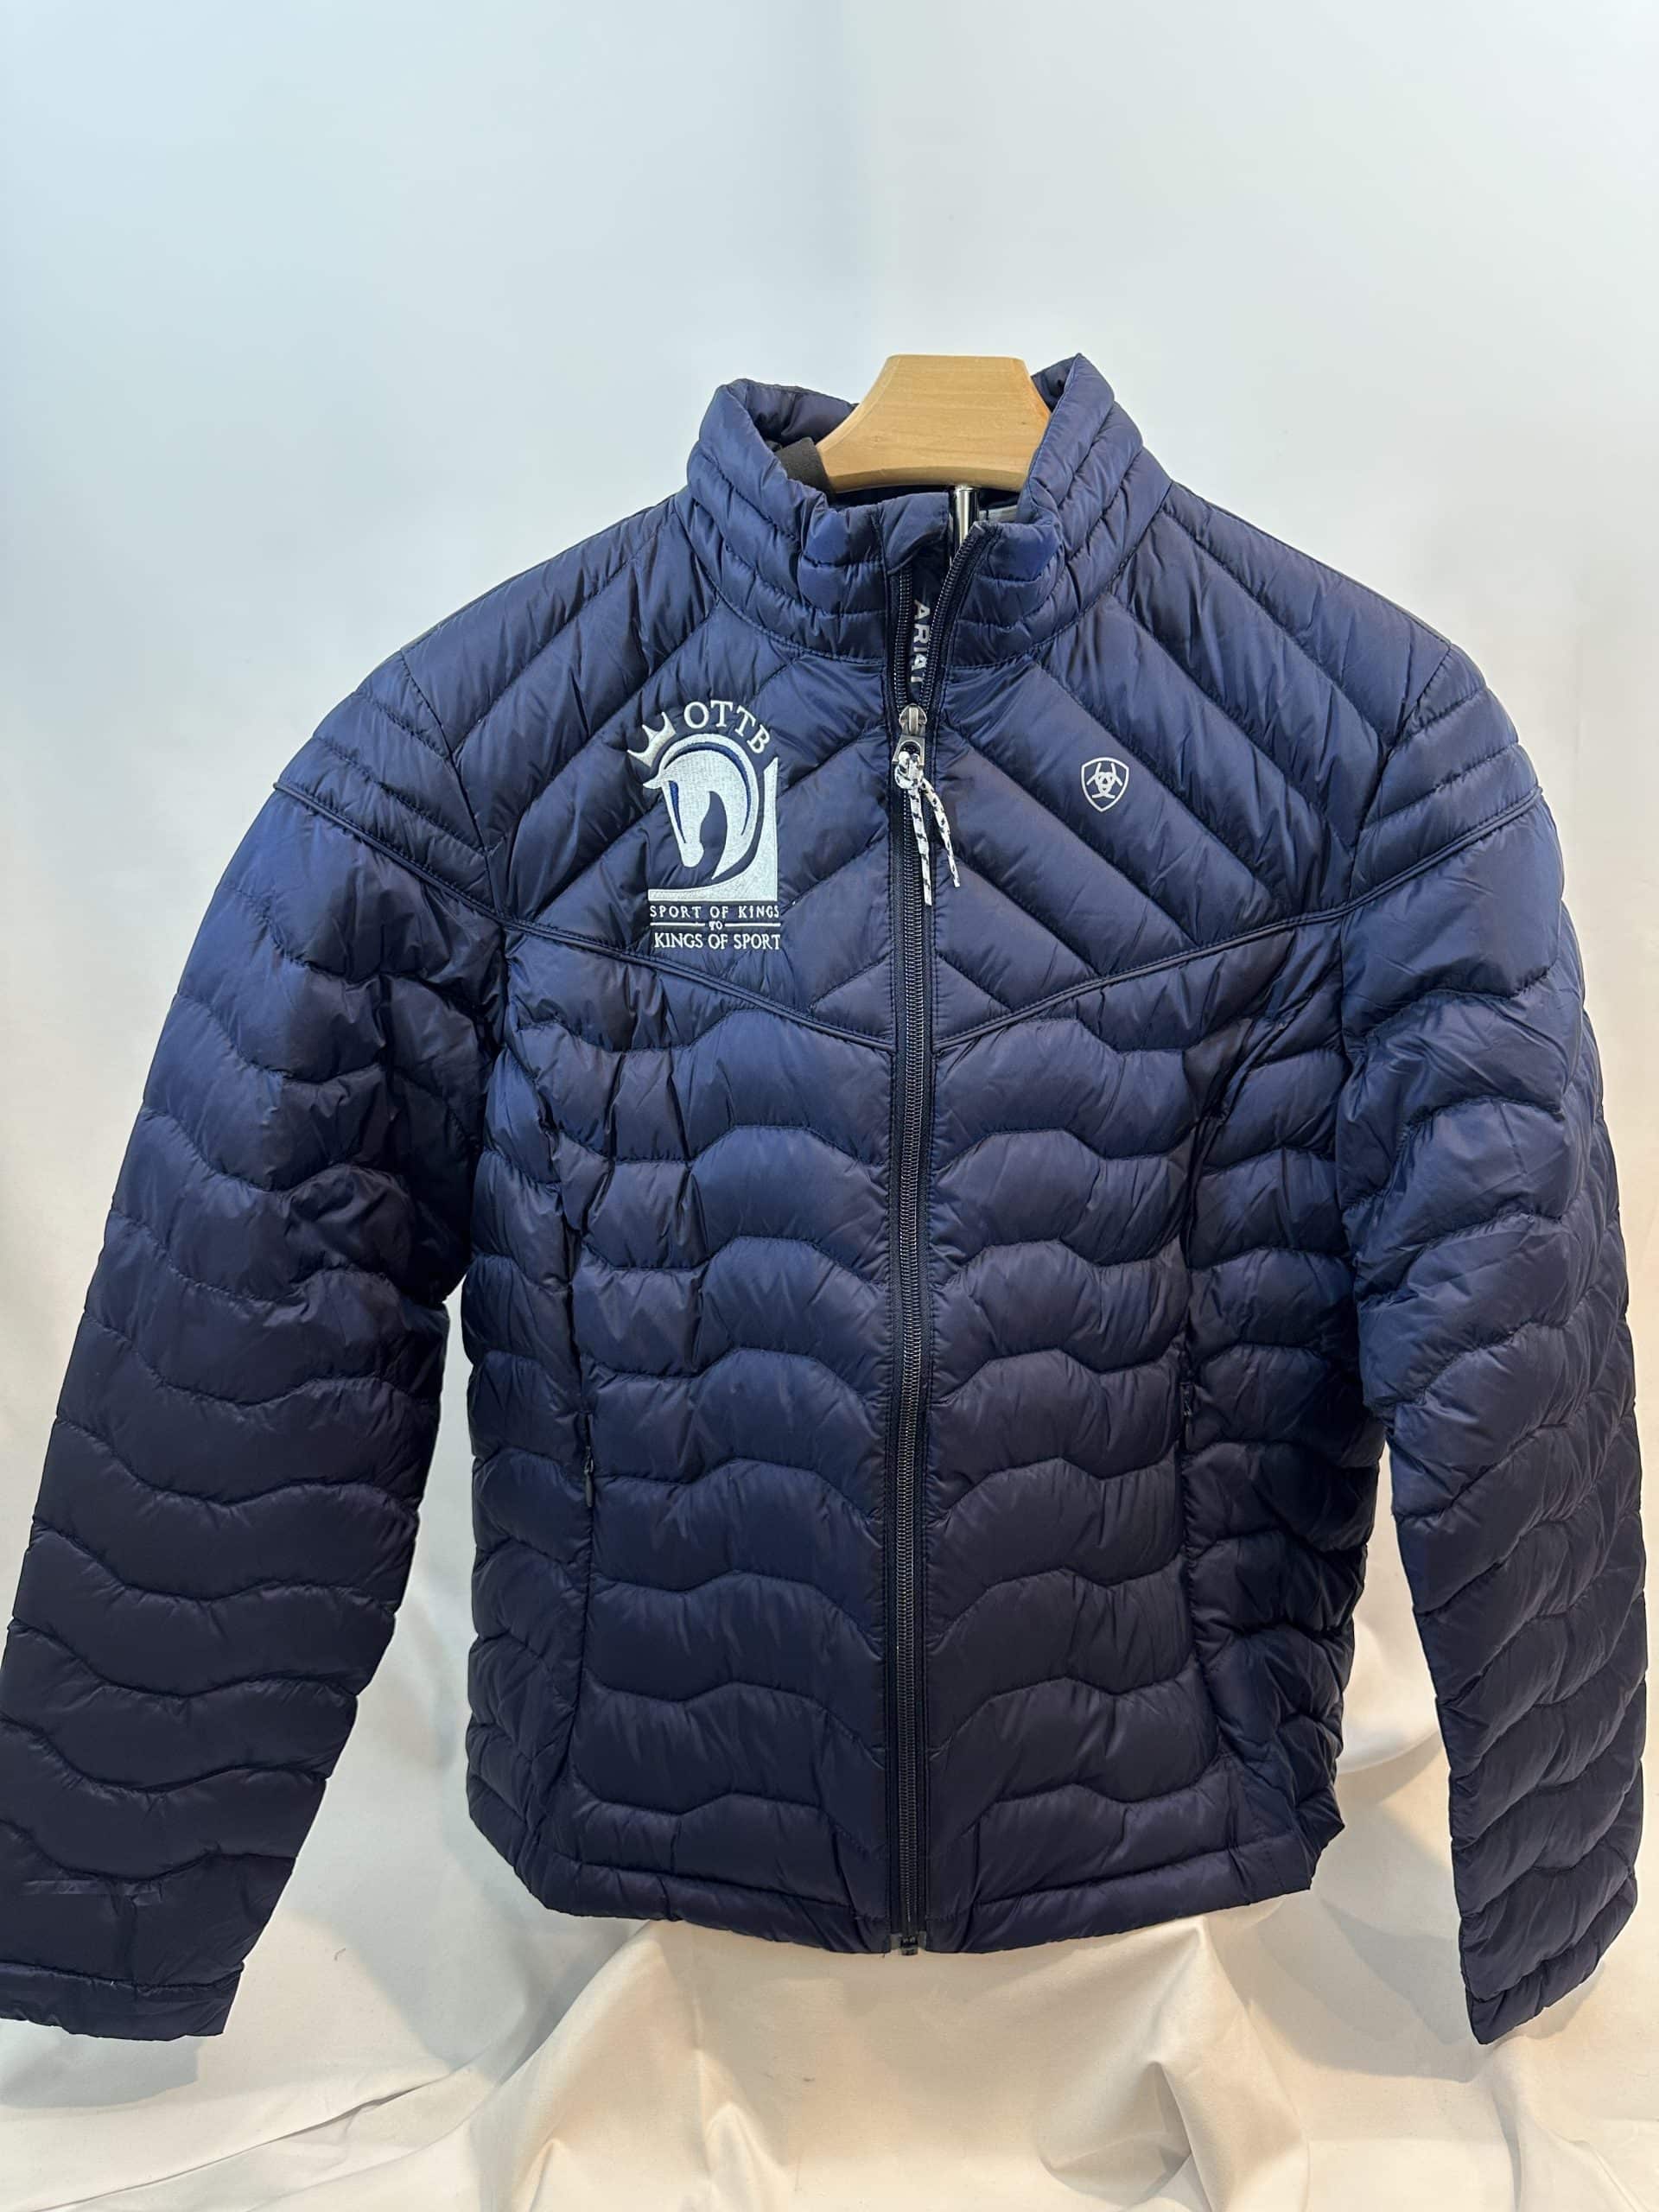 Featured image for “Ariat Ideal Down Jacket”